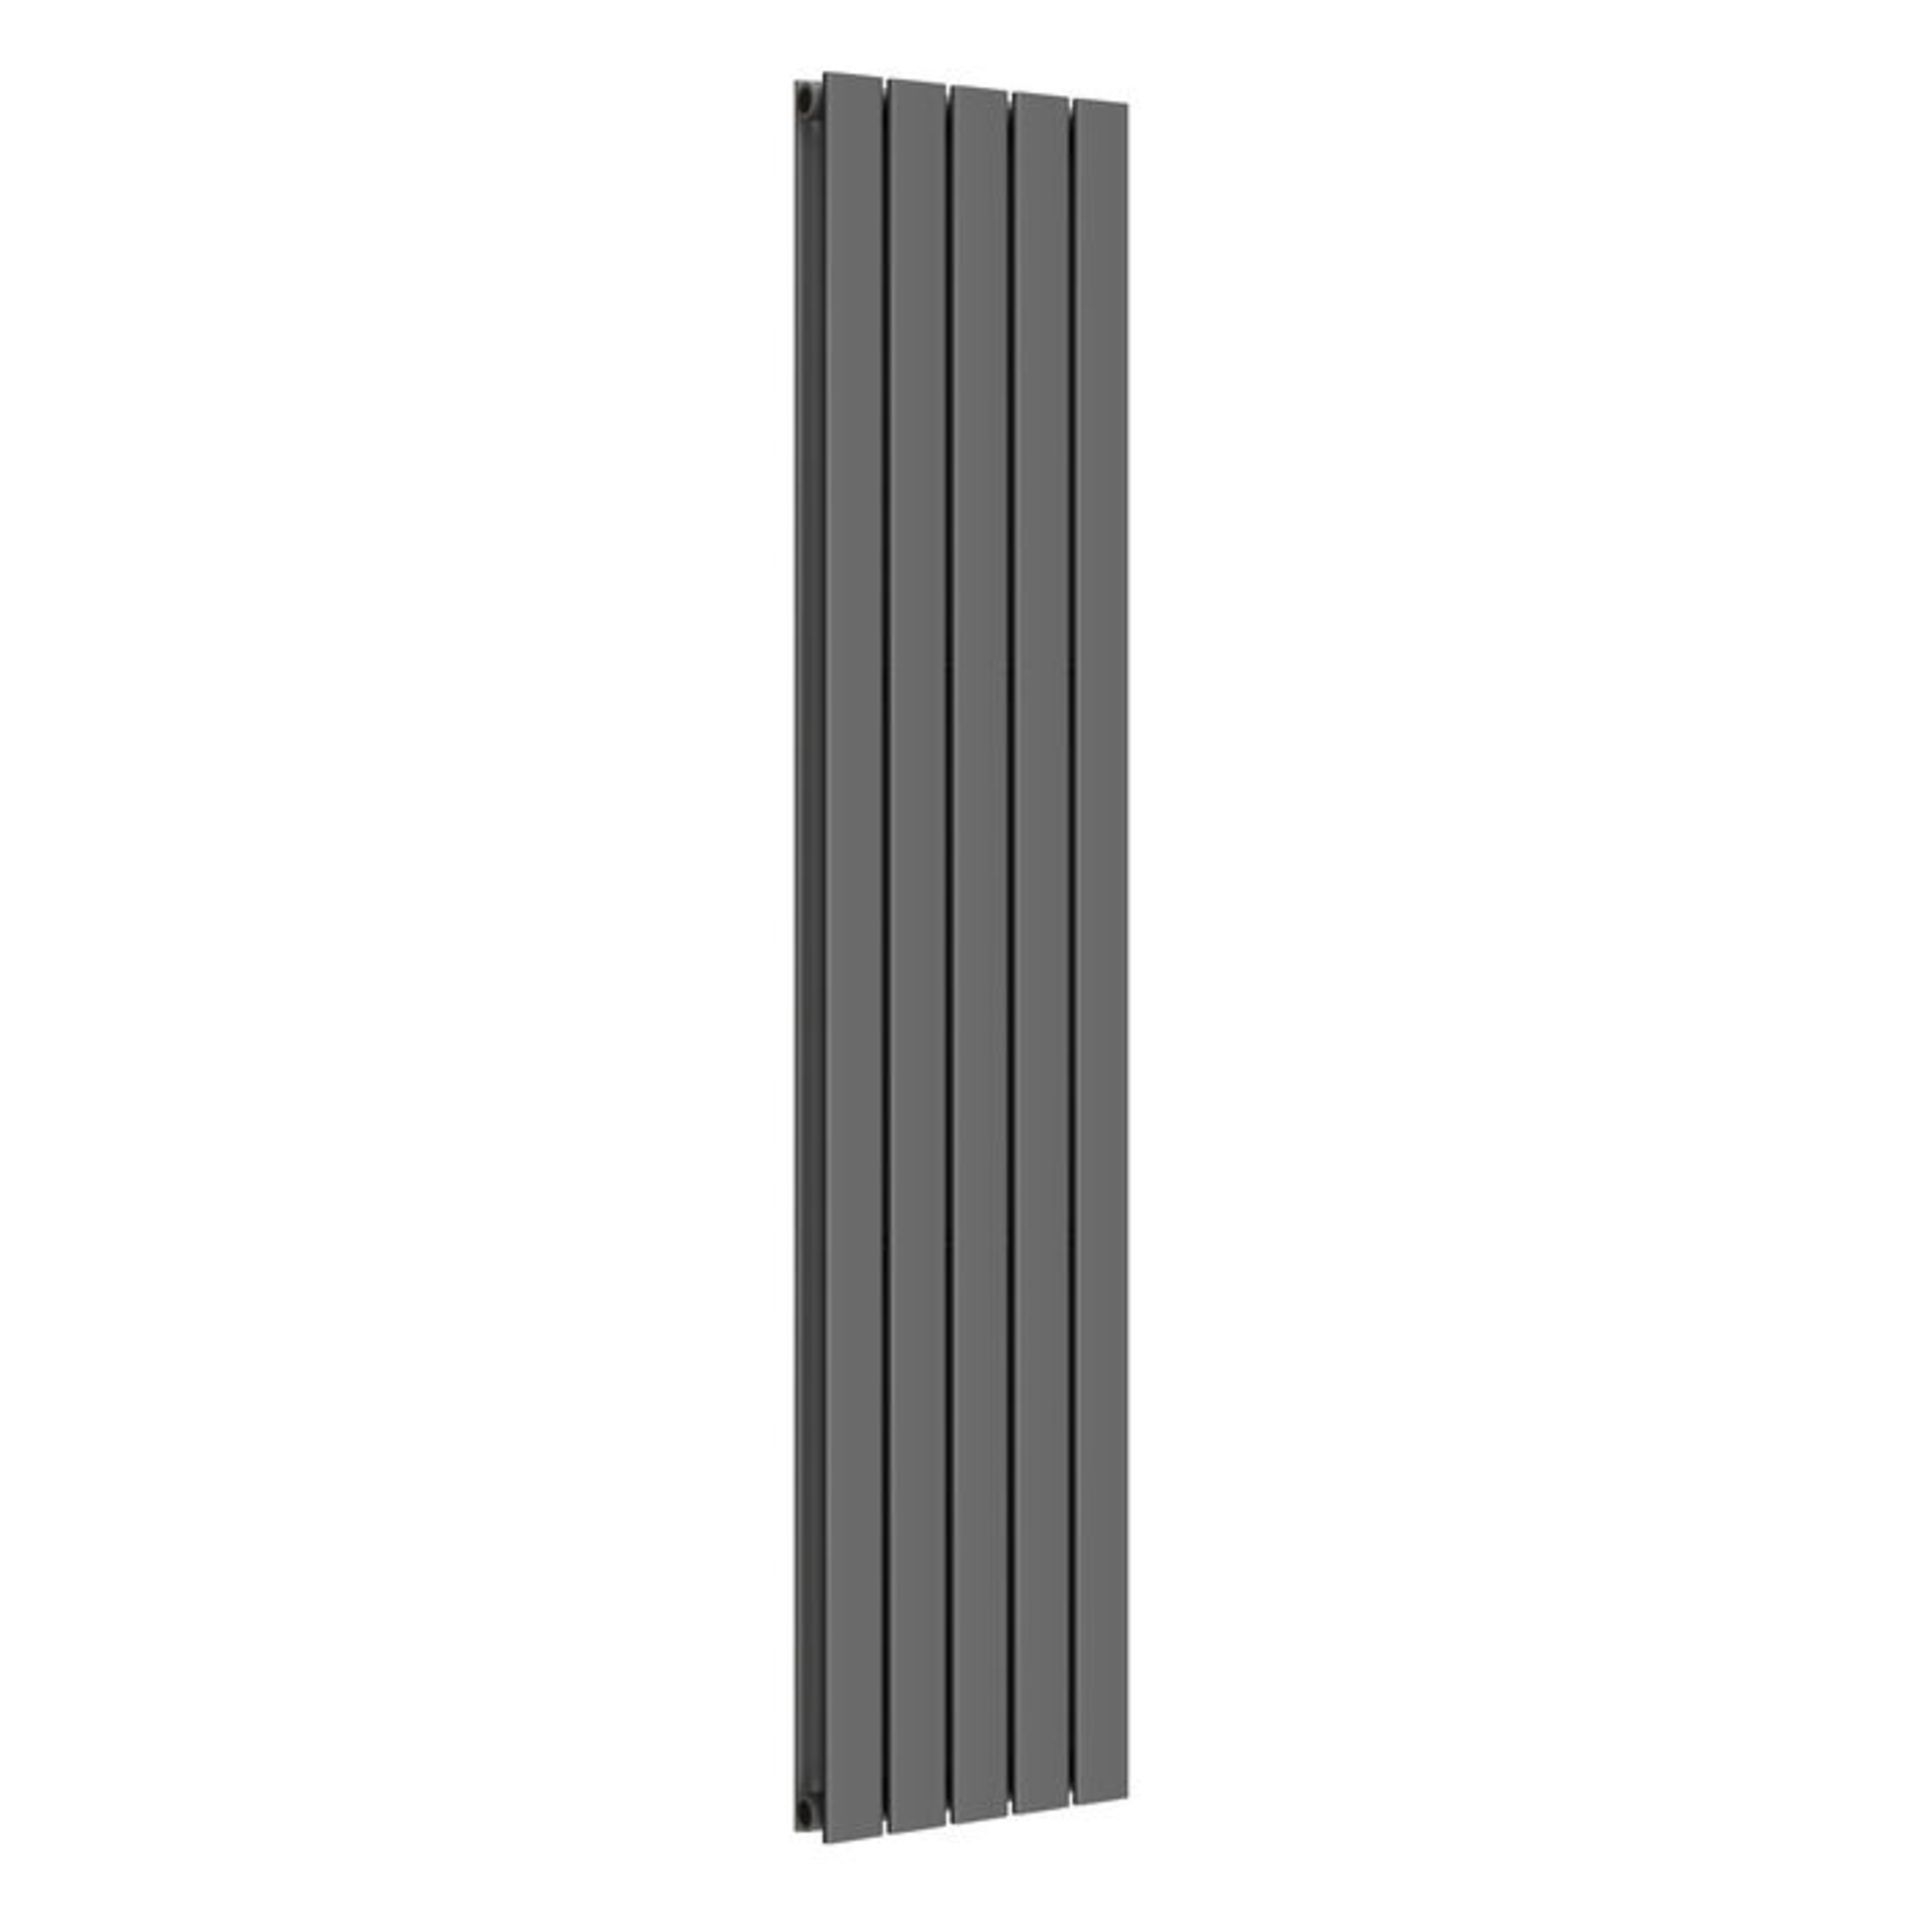 NEW & BOXED 1800x360mm Anthracite Single Flat Pane - Image 2 of 2